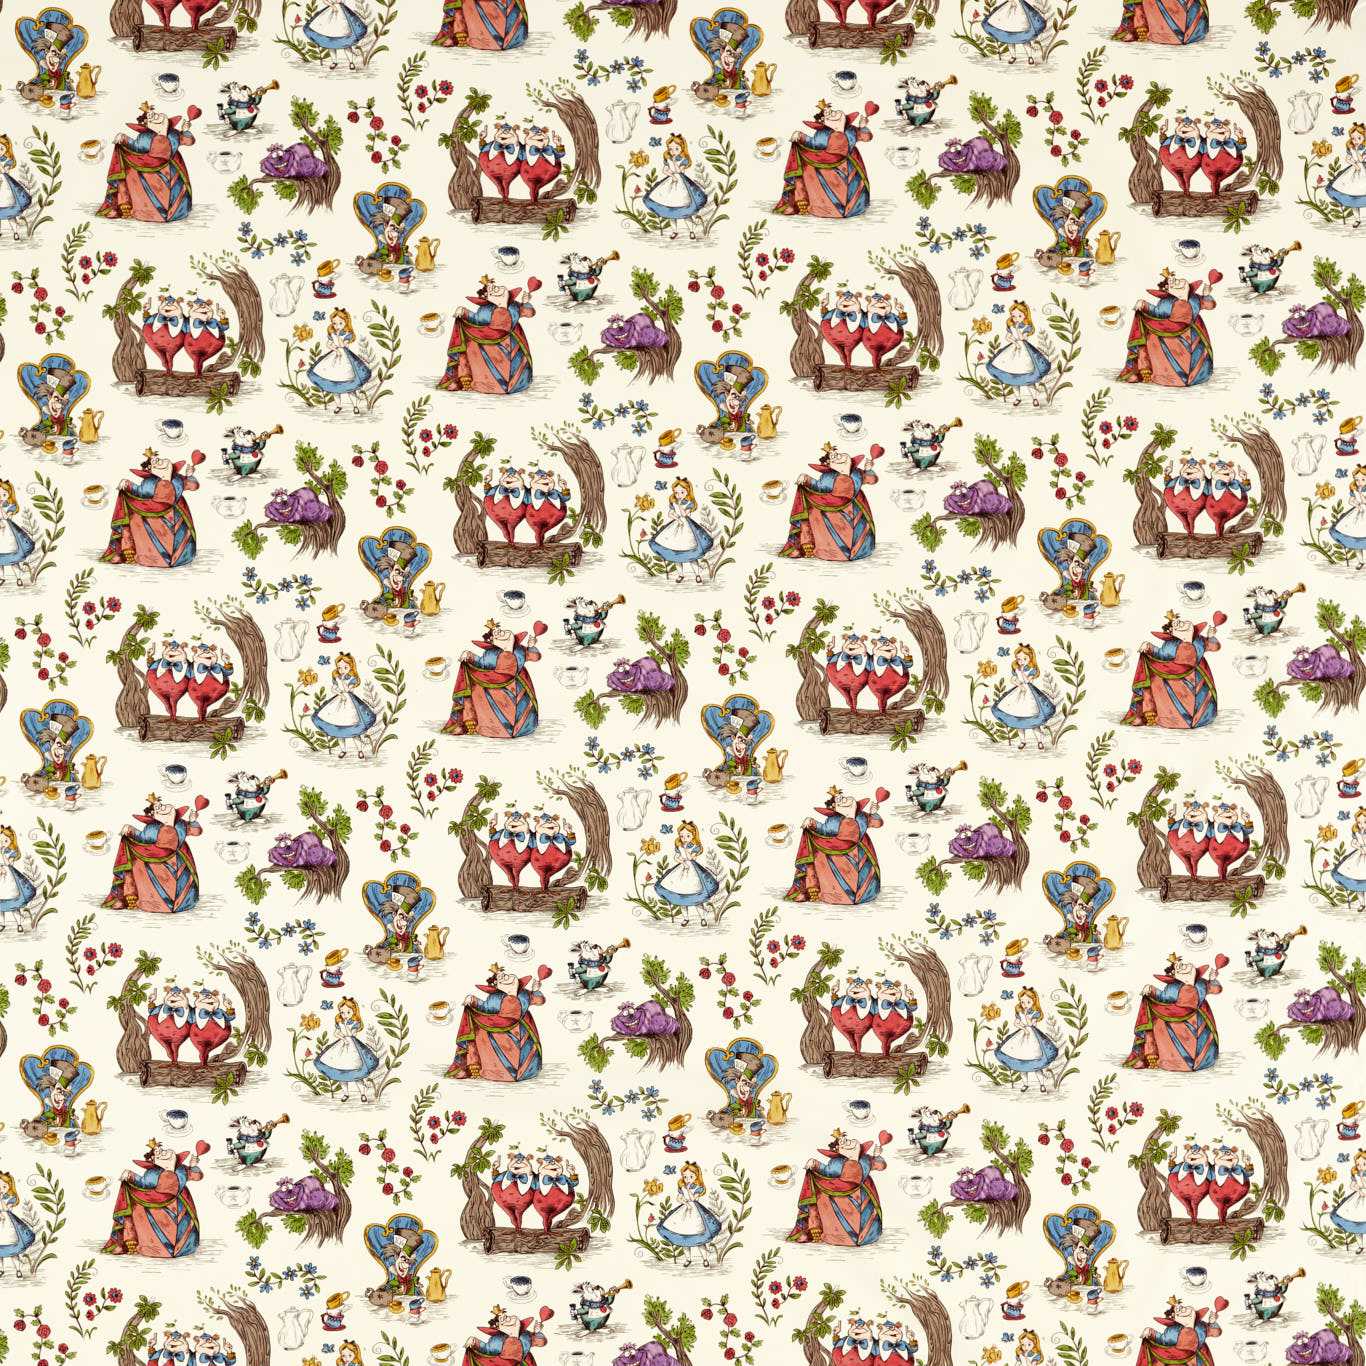 Alice In Wonderland Hundreds & Thousands Fabric by SAN